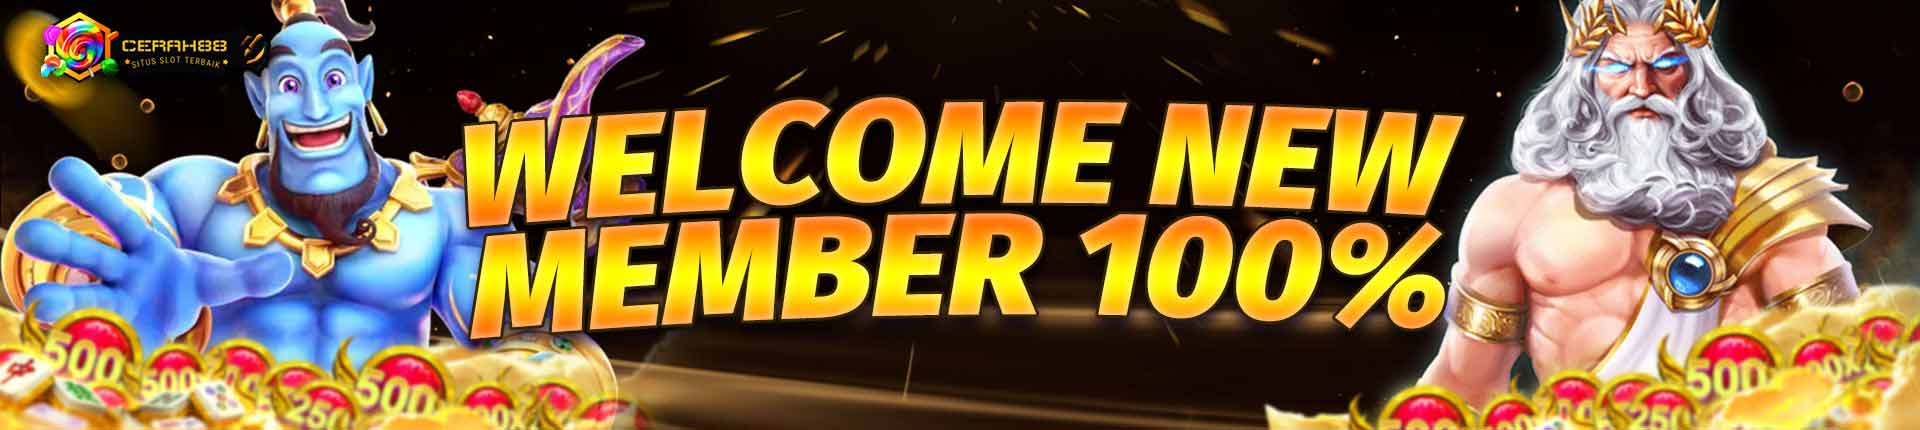 WELCOME NEW MEMBER 100%